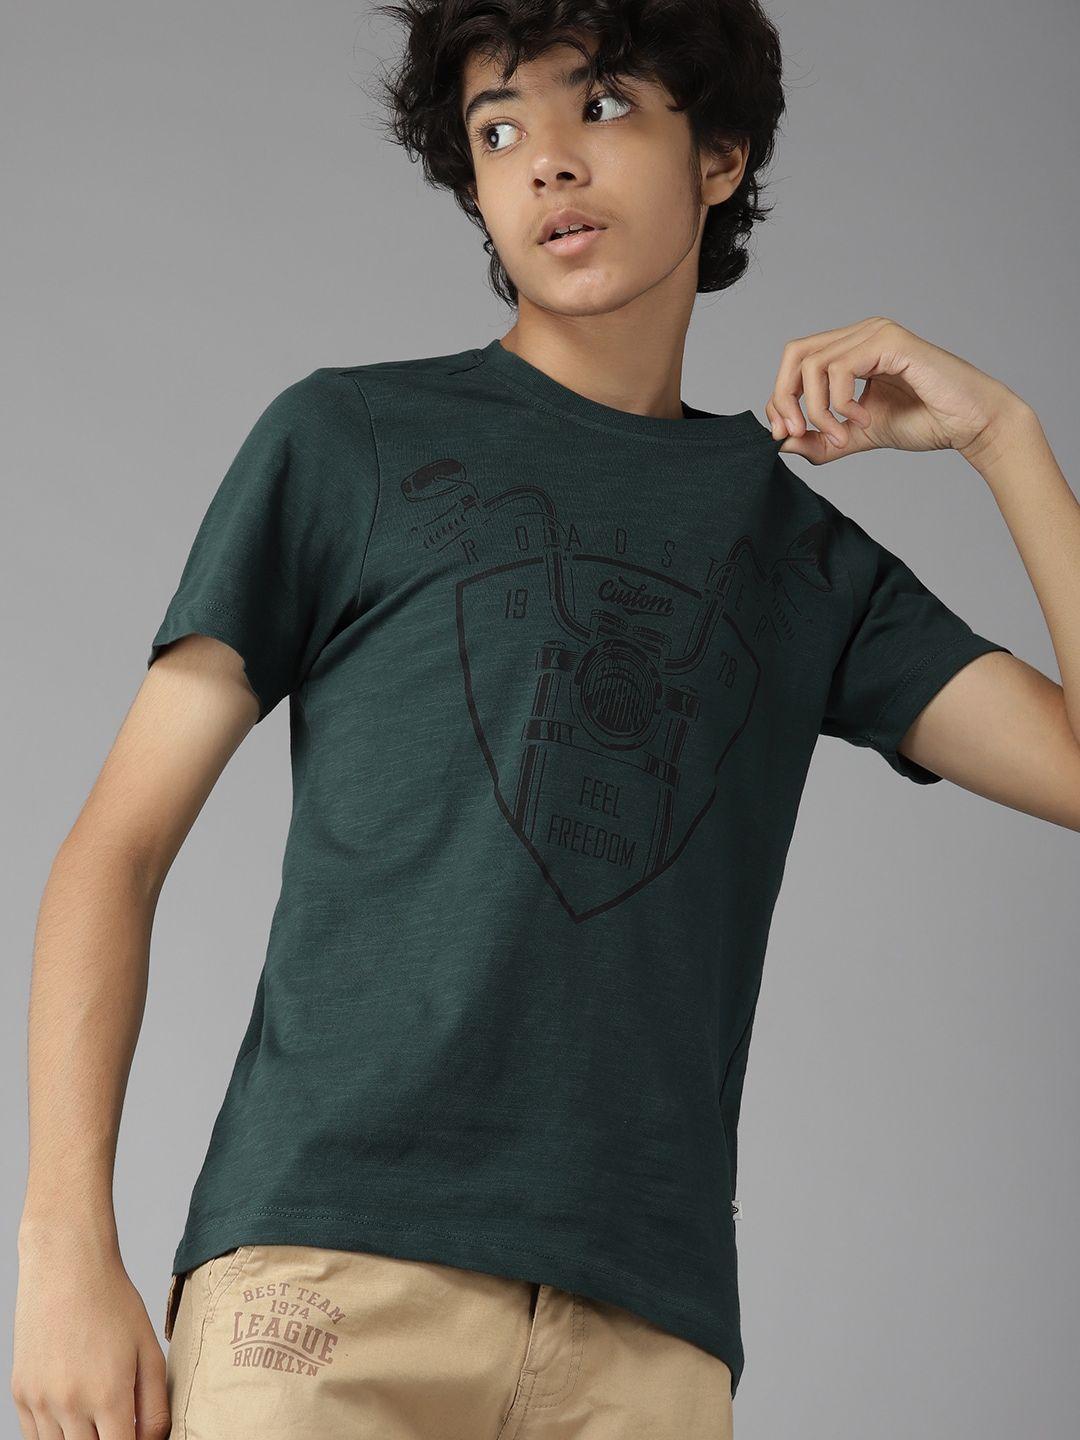 uth by roadster boys green & black graphic printed cotton t-shirt